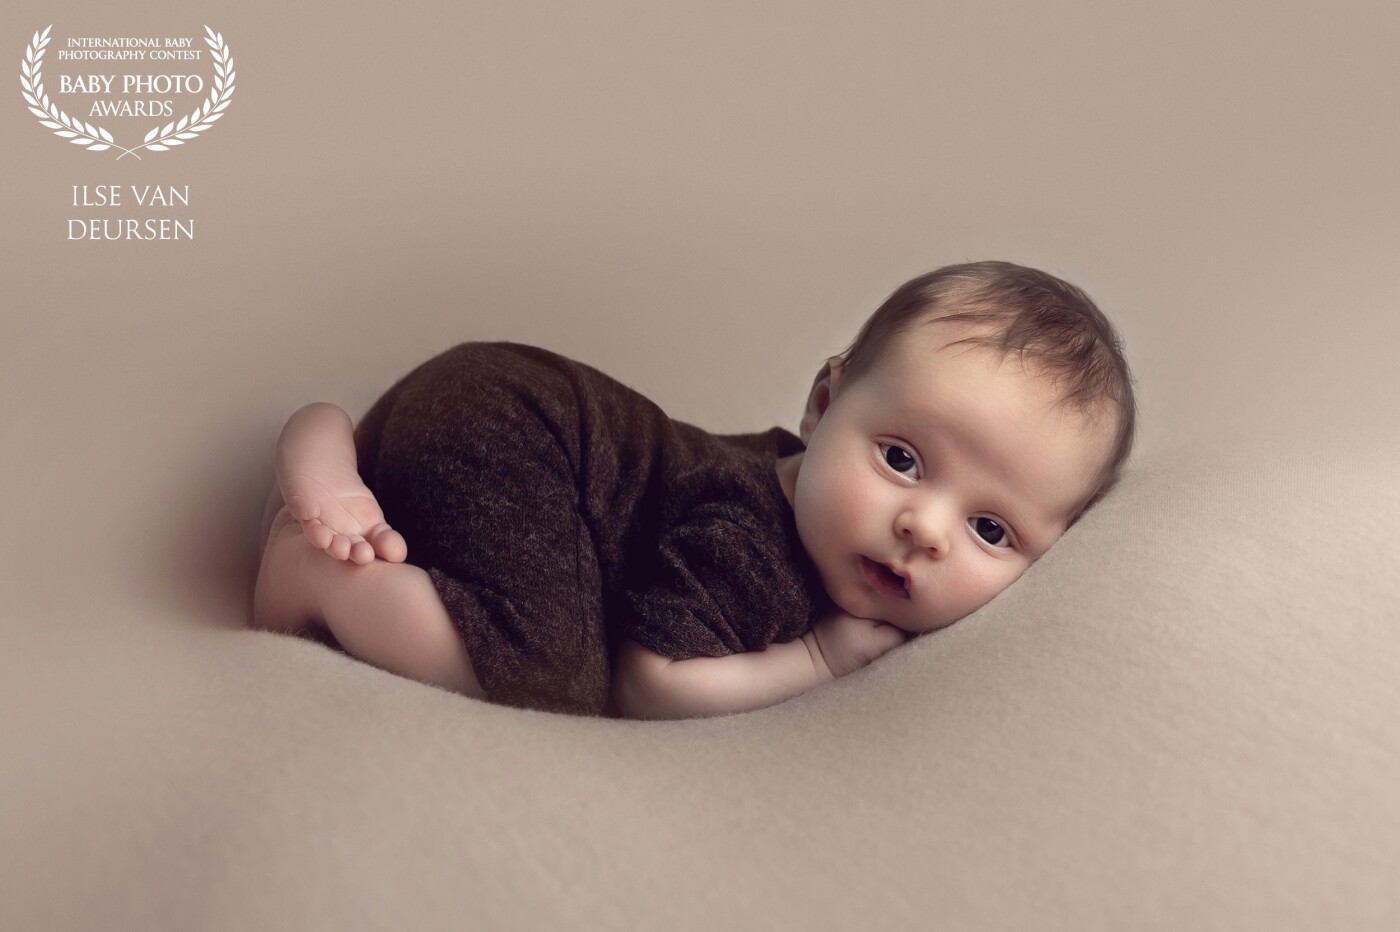 Through to the lockdown in Belgium, this little guy couldn't come to my studio for his newborn shoot at 8 days. So, his mom rebooked and they came at the age of 7 weeks. Quite a challenge and he was totally awake the whole shoot. But you had to love his eyes!